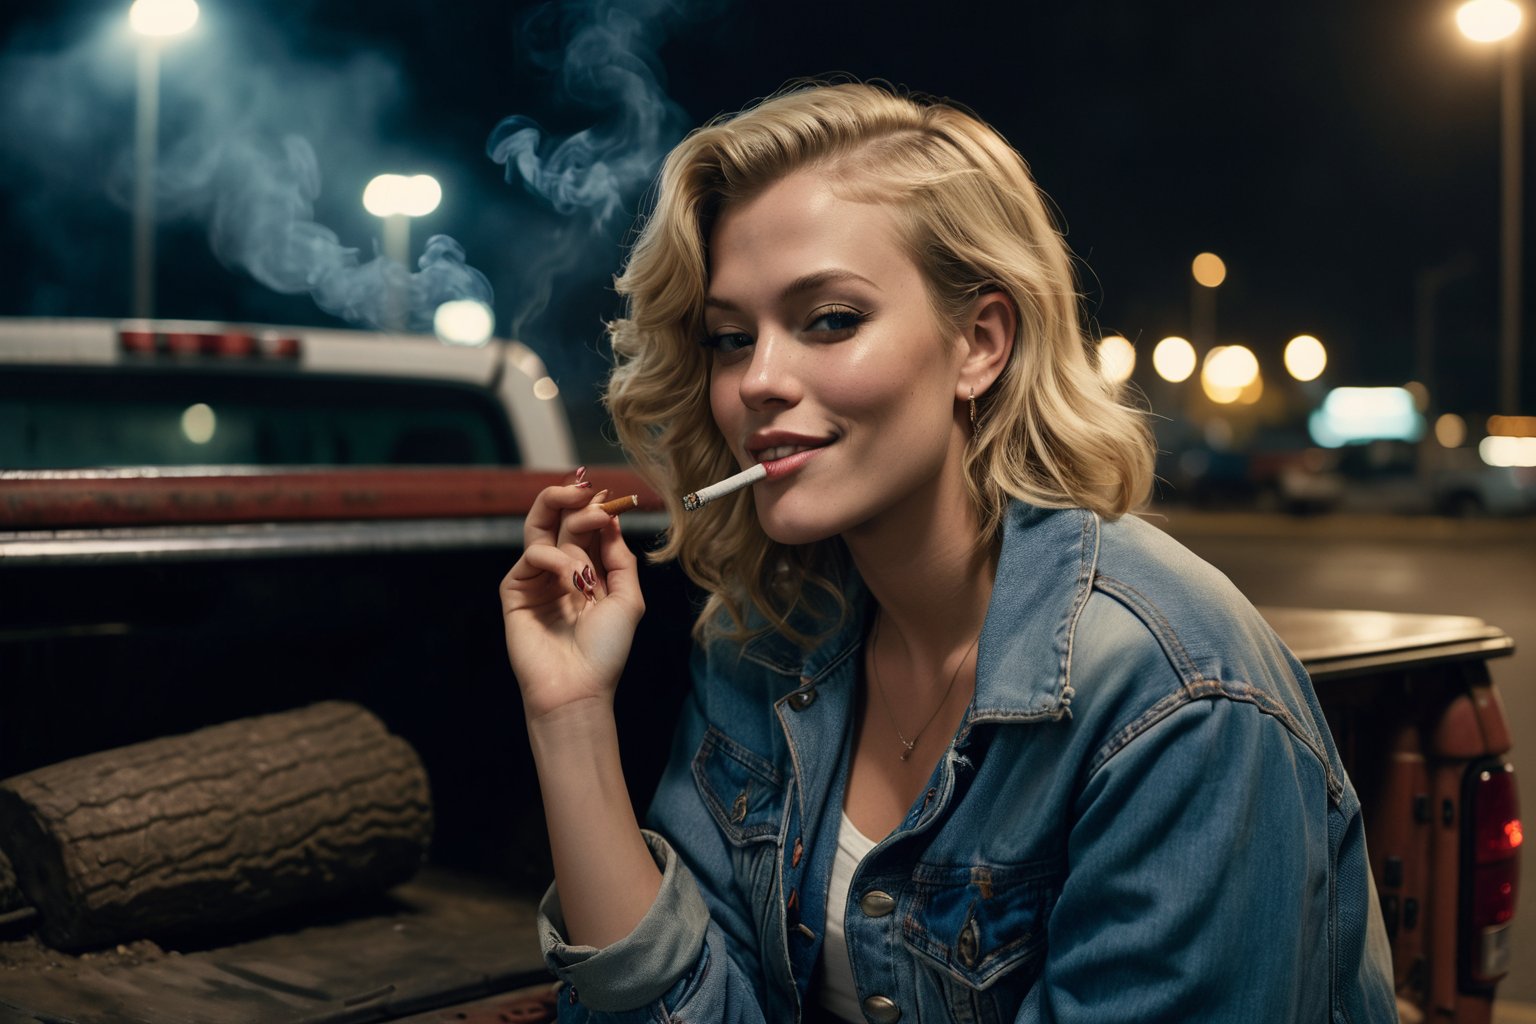 Closeup nighttime photo of a blonde woman smoking and  leaning against the open trunk of a pickup truck. She is smoking. She is wearing a denim jacke, and exudes a carefree attitude with a cigarette in her hand and a playful grin on her face. The background reveals a dimly lit parking lot, with just enough light to cast a mysterious ambiance. A hazy atmosphere envelops the scene, adding to the overall intrigue.